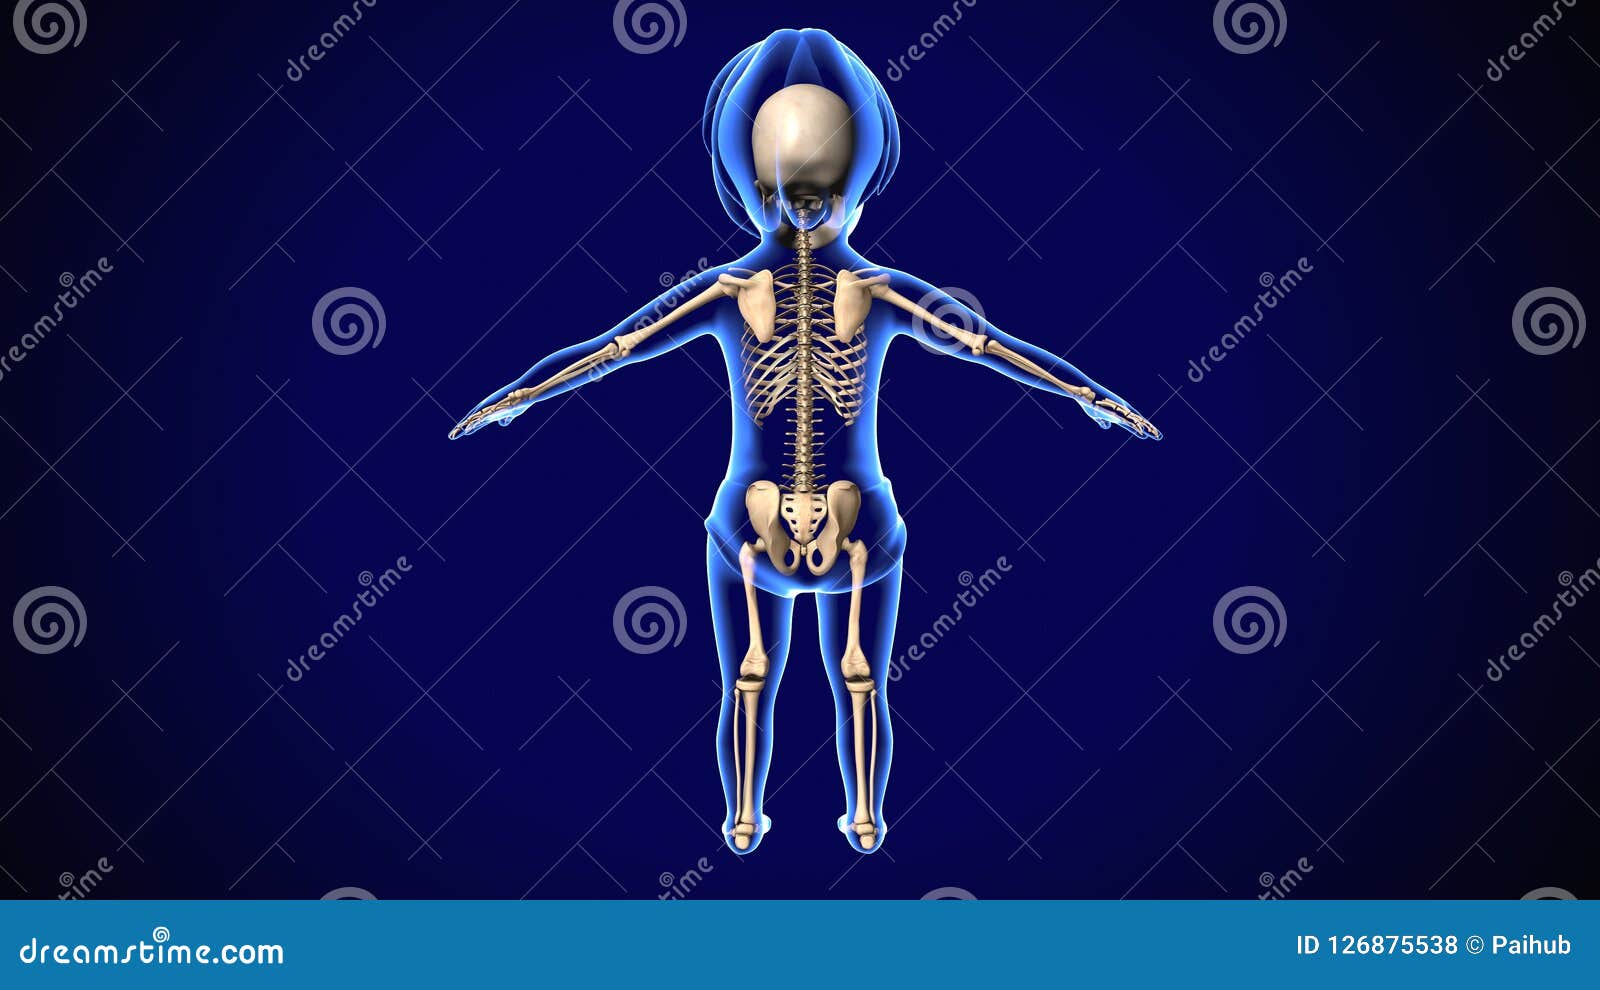 How Many Bones Does A Human Baby Have At Birth - Baby Viewer